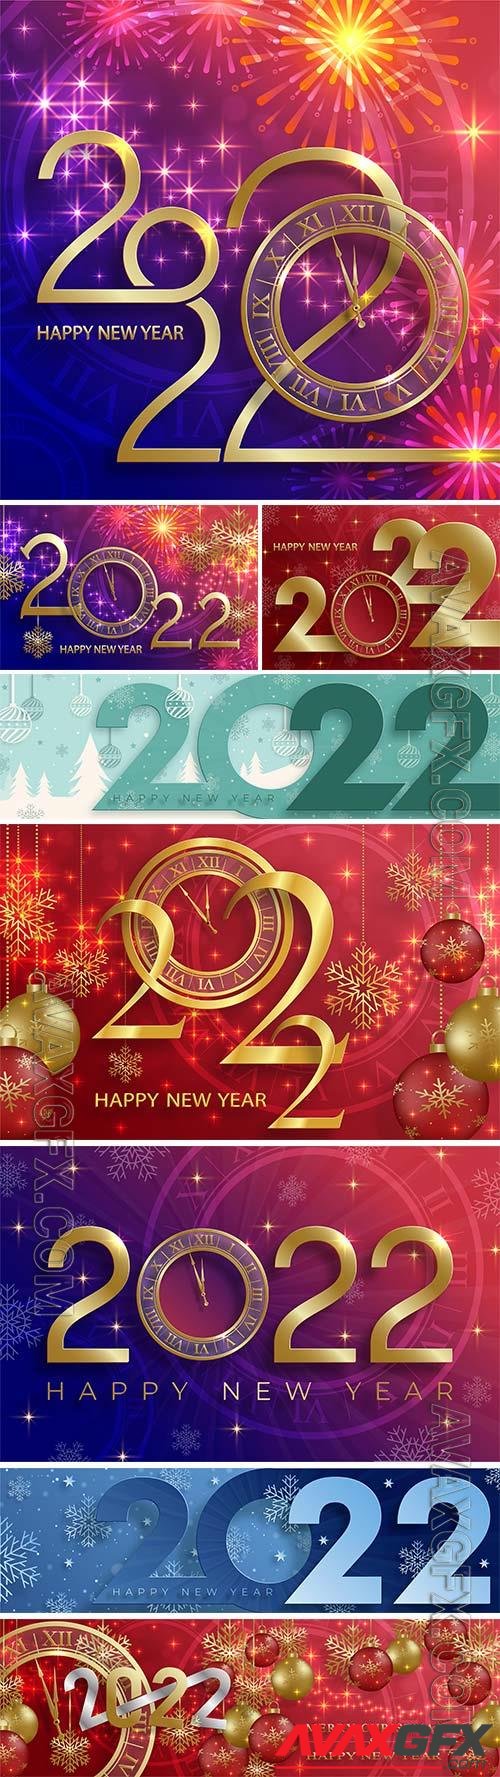 Happy new year 2022, christmas balls and snowflakes concept on color vector background